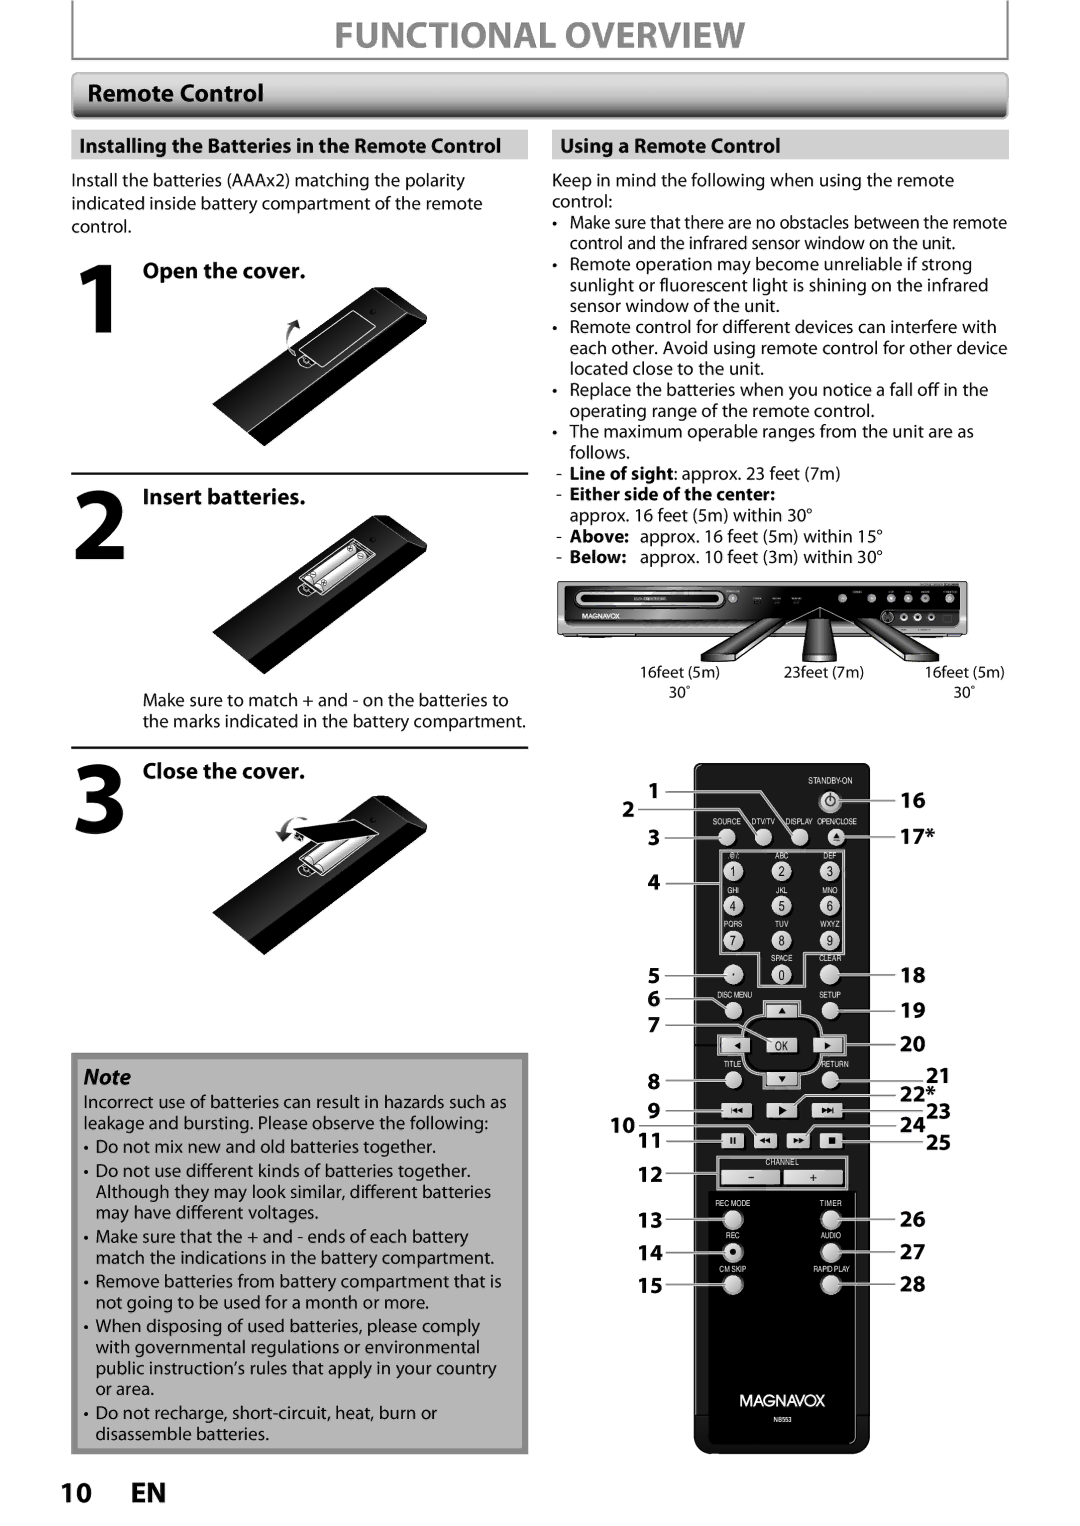 Magnavox ZC352MW8 owner manual Open the cover Insert batteries, Close the cover, Using a Remote Control 